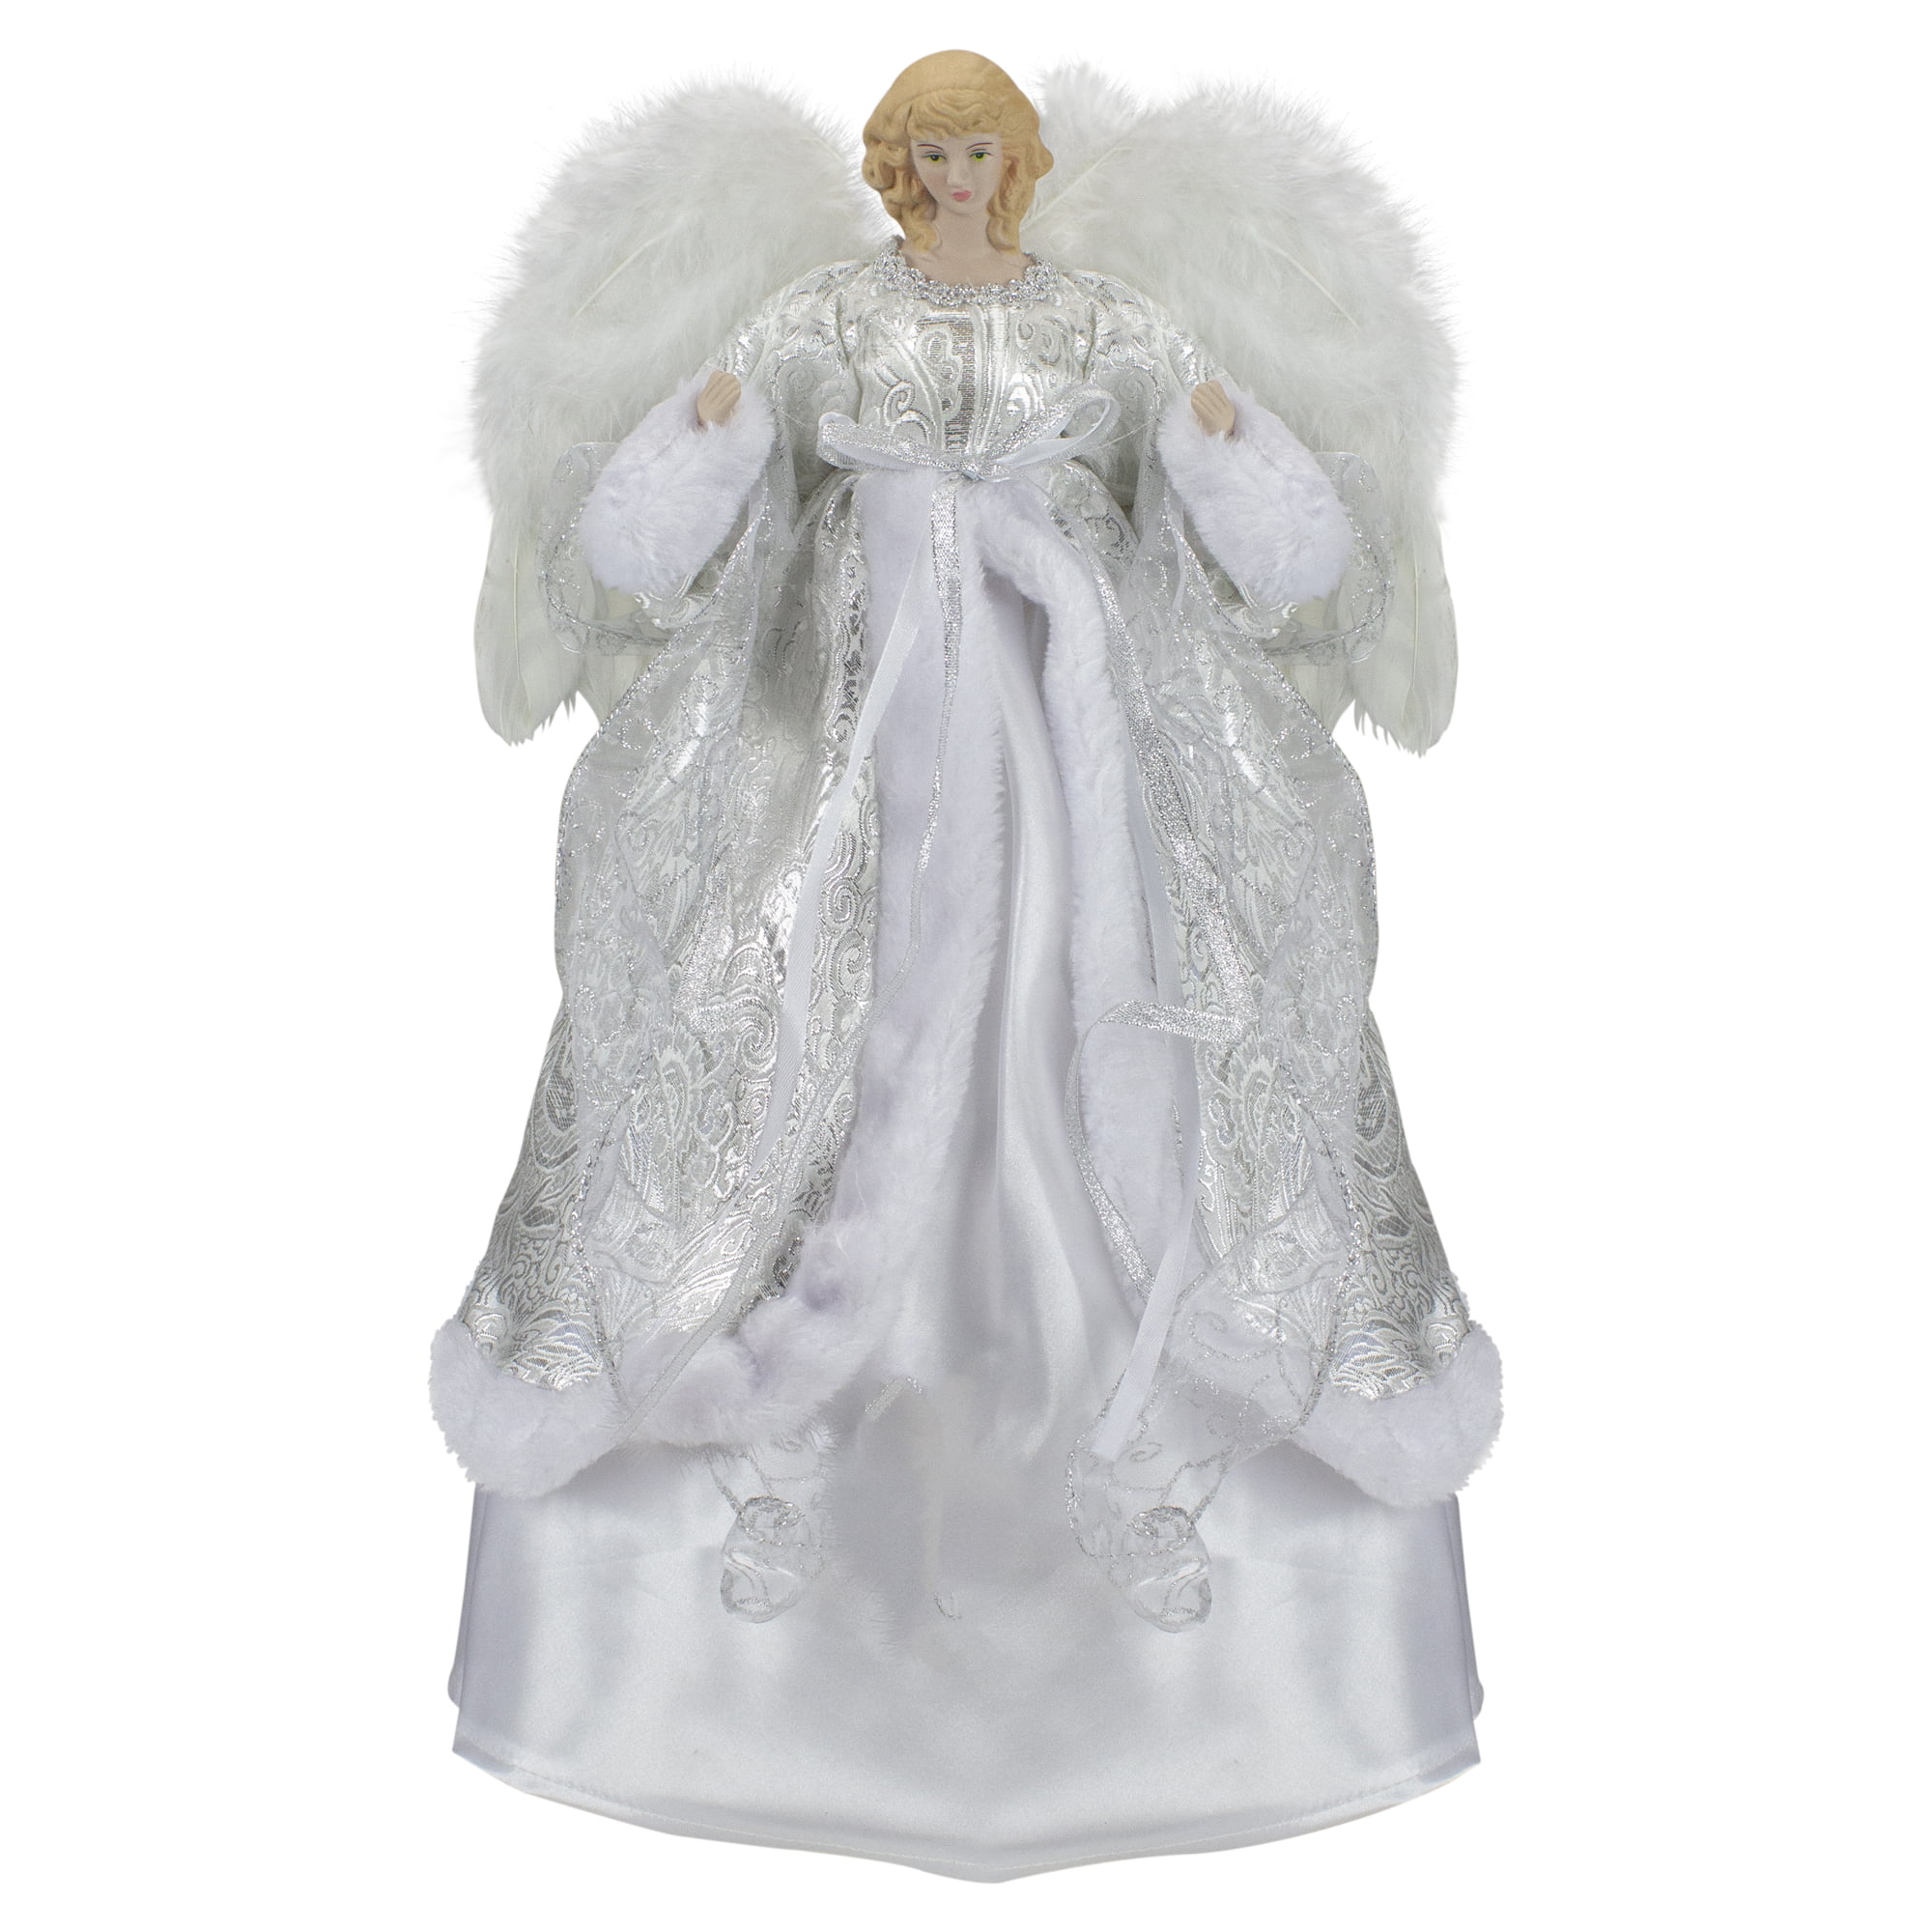 Unlit 18" Green and Brown Angel in a Dress Christmas Tree Topper 